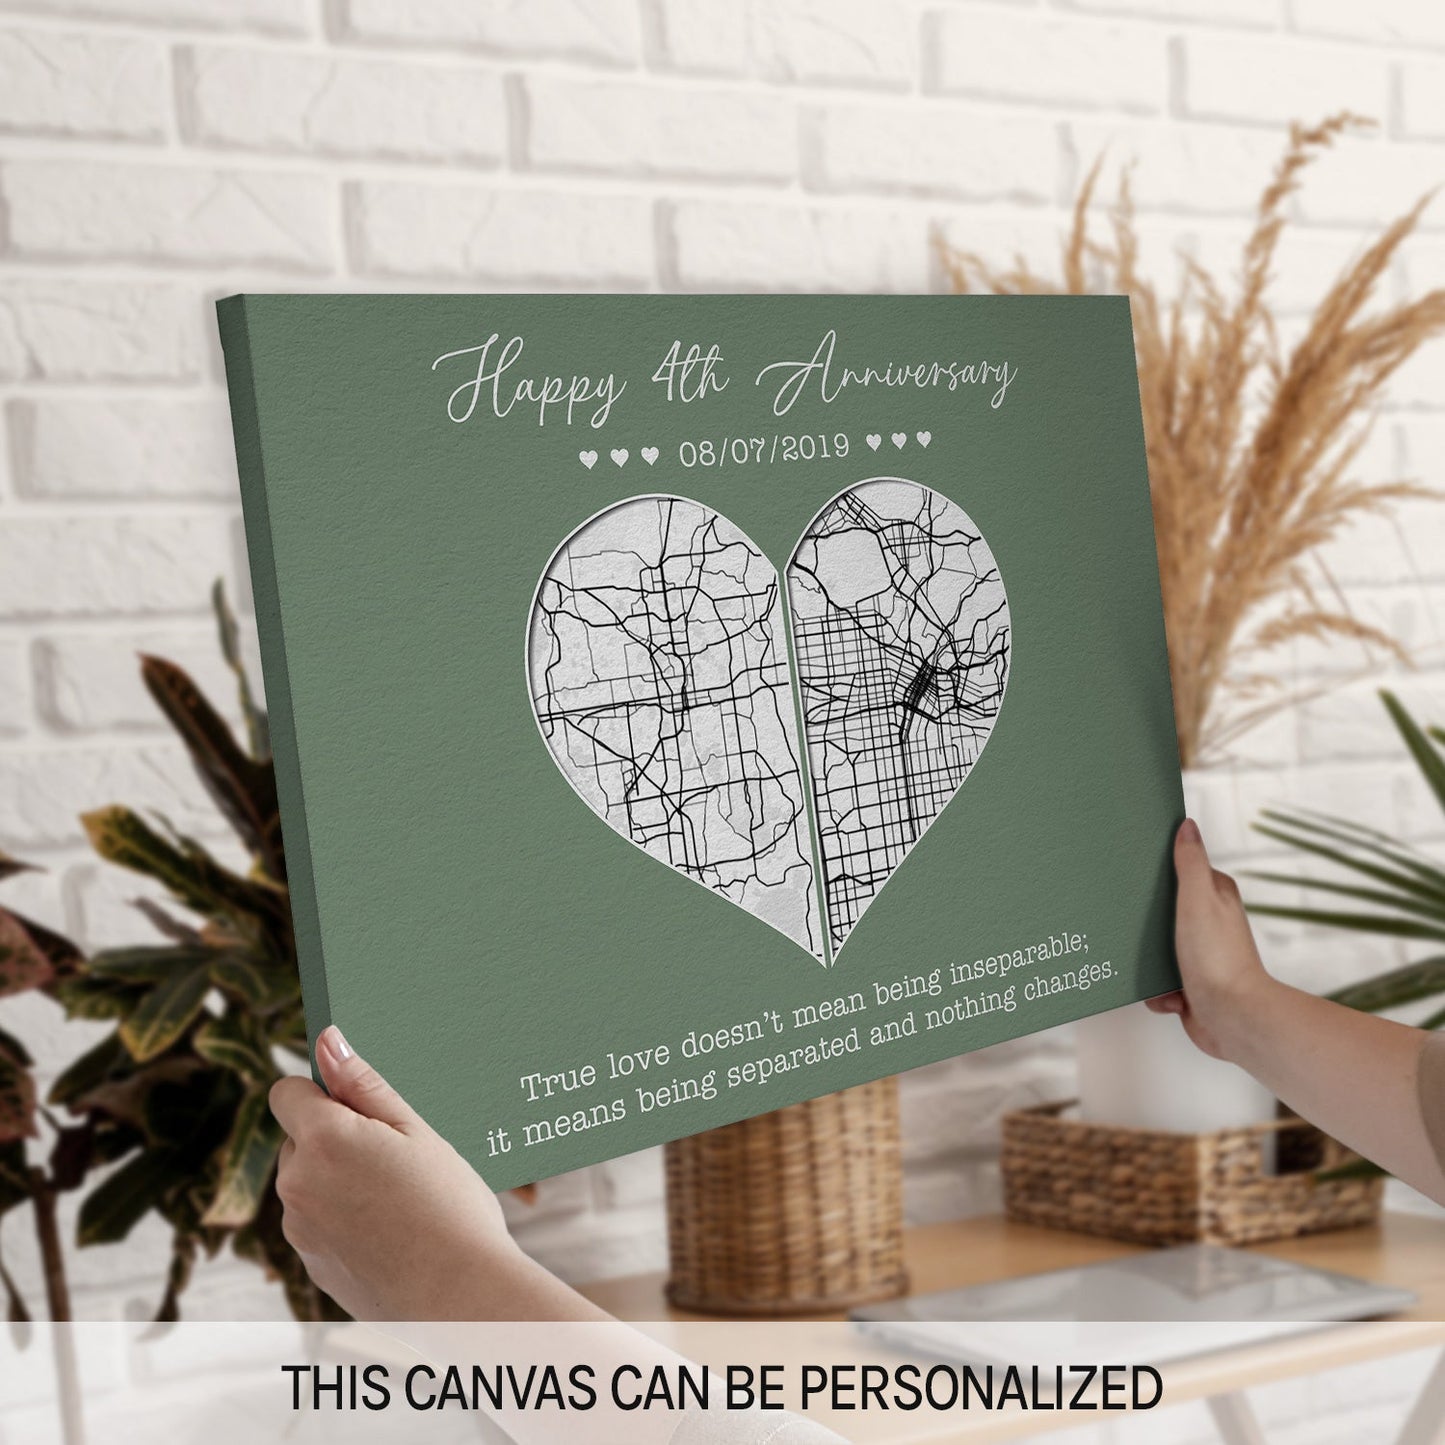 Four Year Anniversary True Love Doesn't Mean Being Inseparable - Personalized 4 Year Anniversary gift for him for her - Custom Canvas - MyMindfulGifts